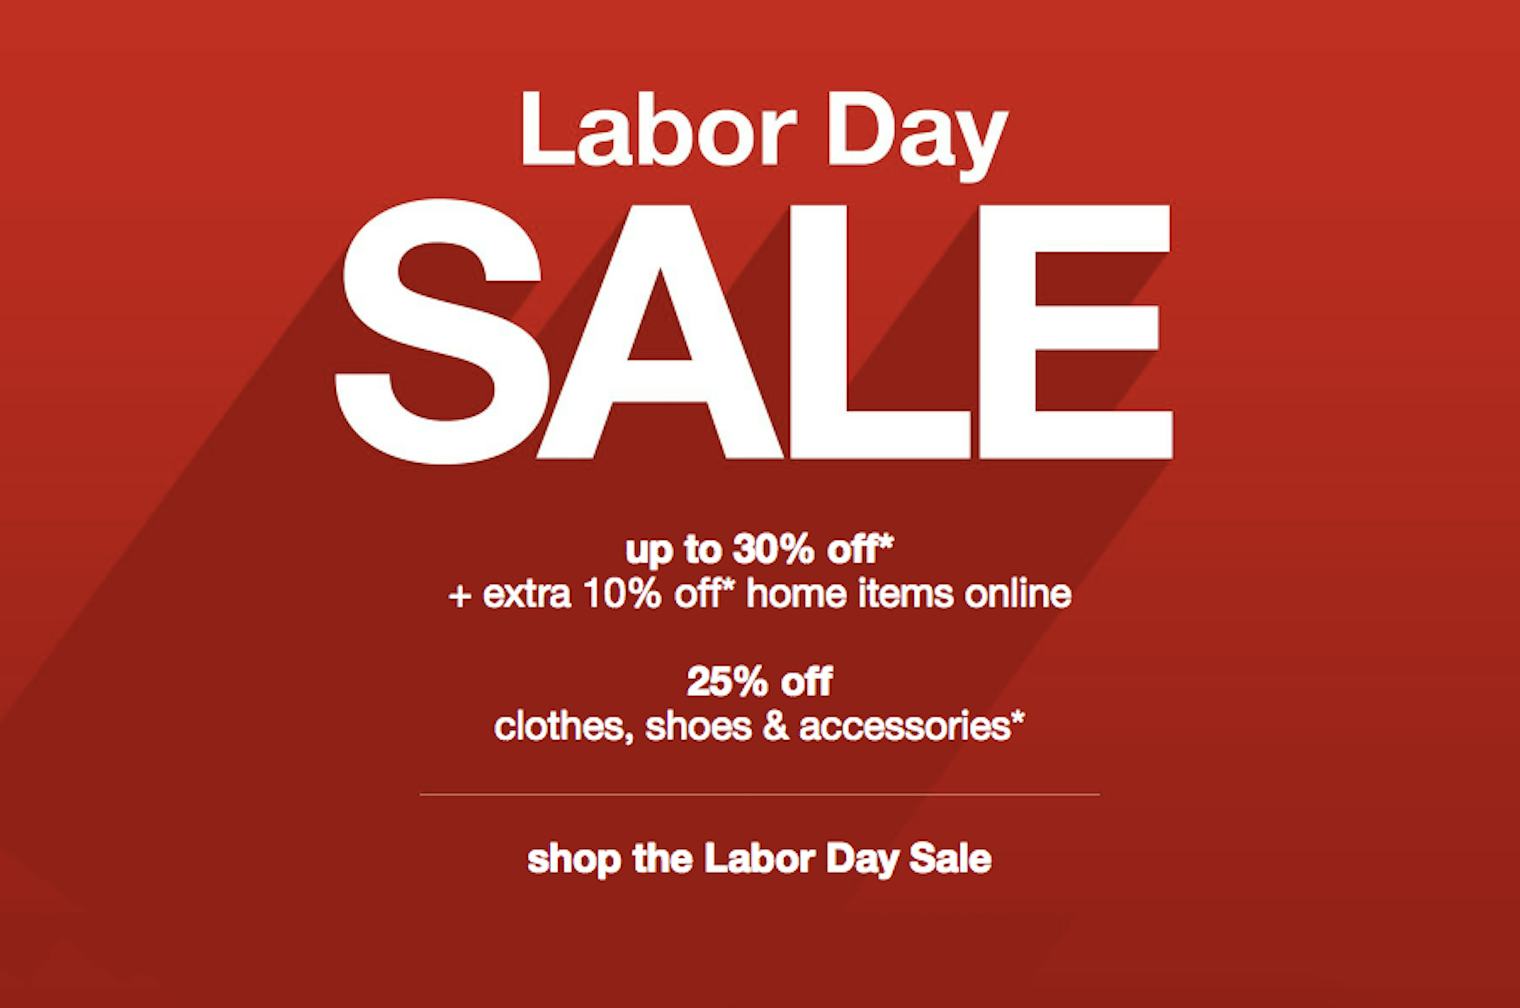 Target Labor Day Sales On Clothes & Shoes Are Too Good To Miss